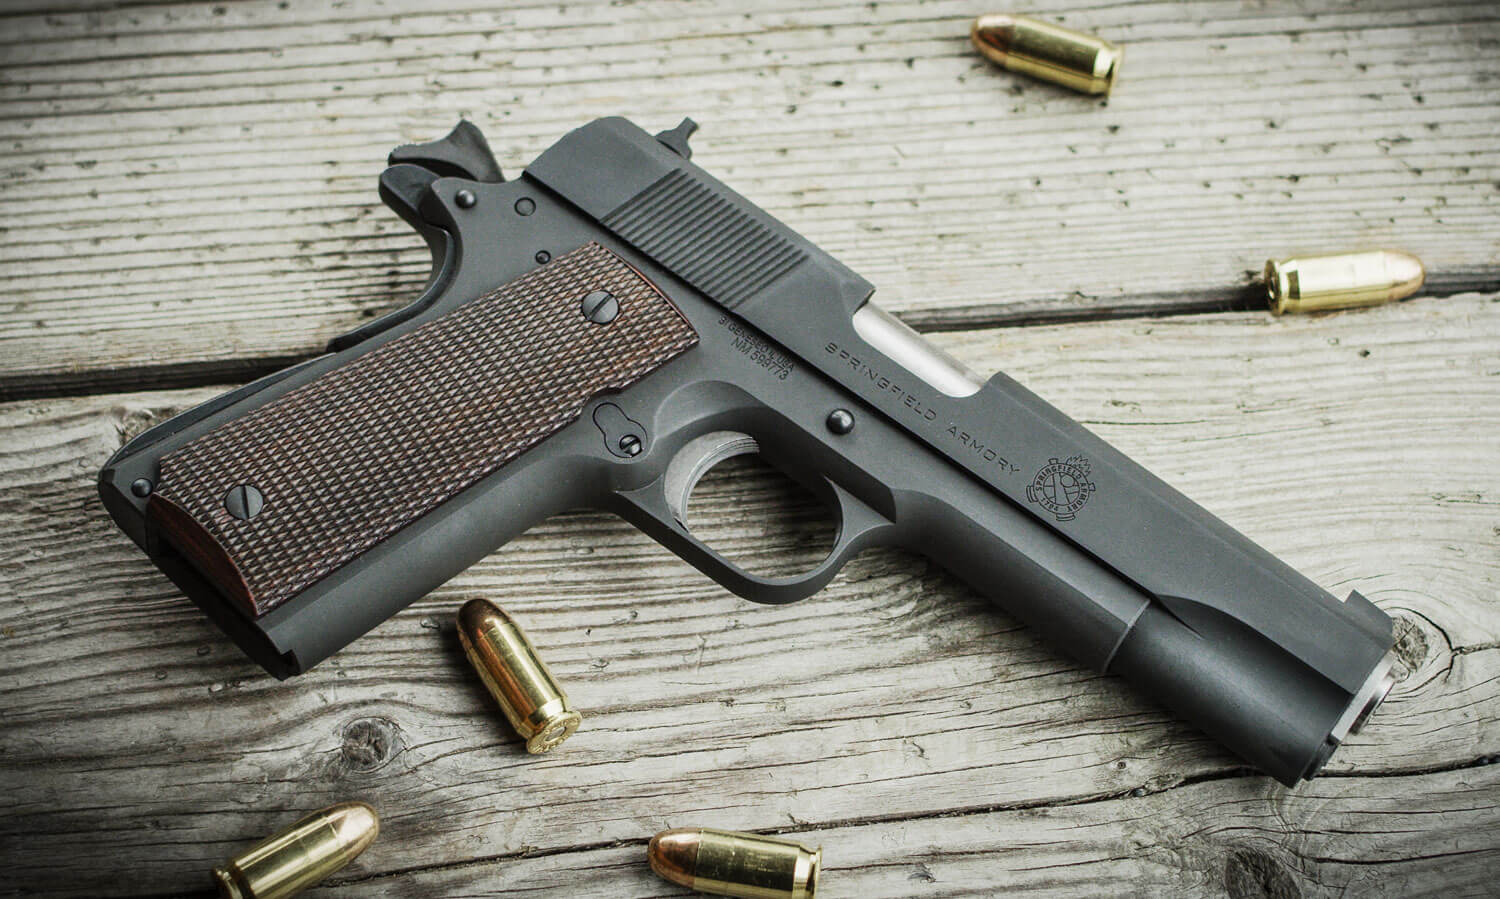 In this photo is a Springfield Armory M1911 Mil Spec .45 ACP pistol. 	The original Colt M1911 is a single-action, recoil-operated, semi-automatic pistol chambered for the .45 ACP cartridge. The pistol's formal U.S. military designation as of 1940 was Automatic Pistol, Caliber .45, M1911 for the original model adopted in March 1911, and Automatic Pistol, Caliber .45, M1911A1 for the improved M1911A1 model which entered service in 1926. They were used extensively by the Tunnel Rats in the Vietnam War.